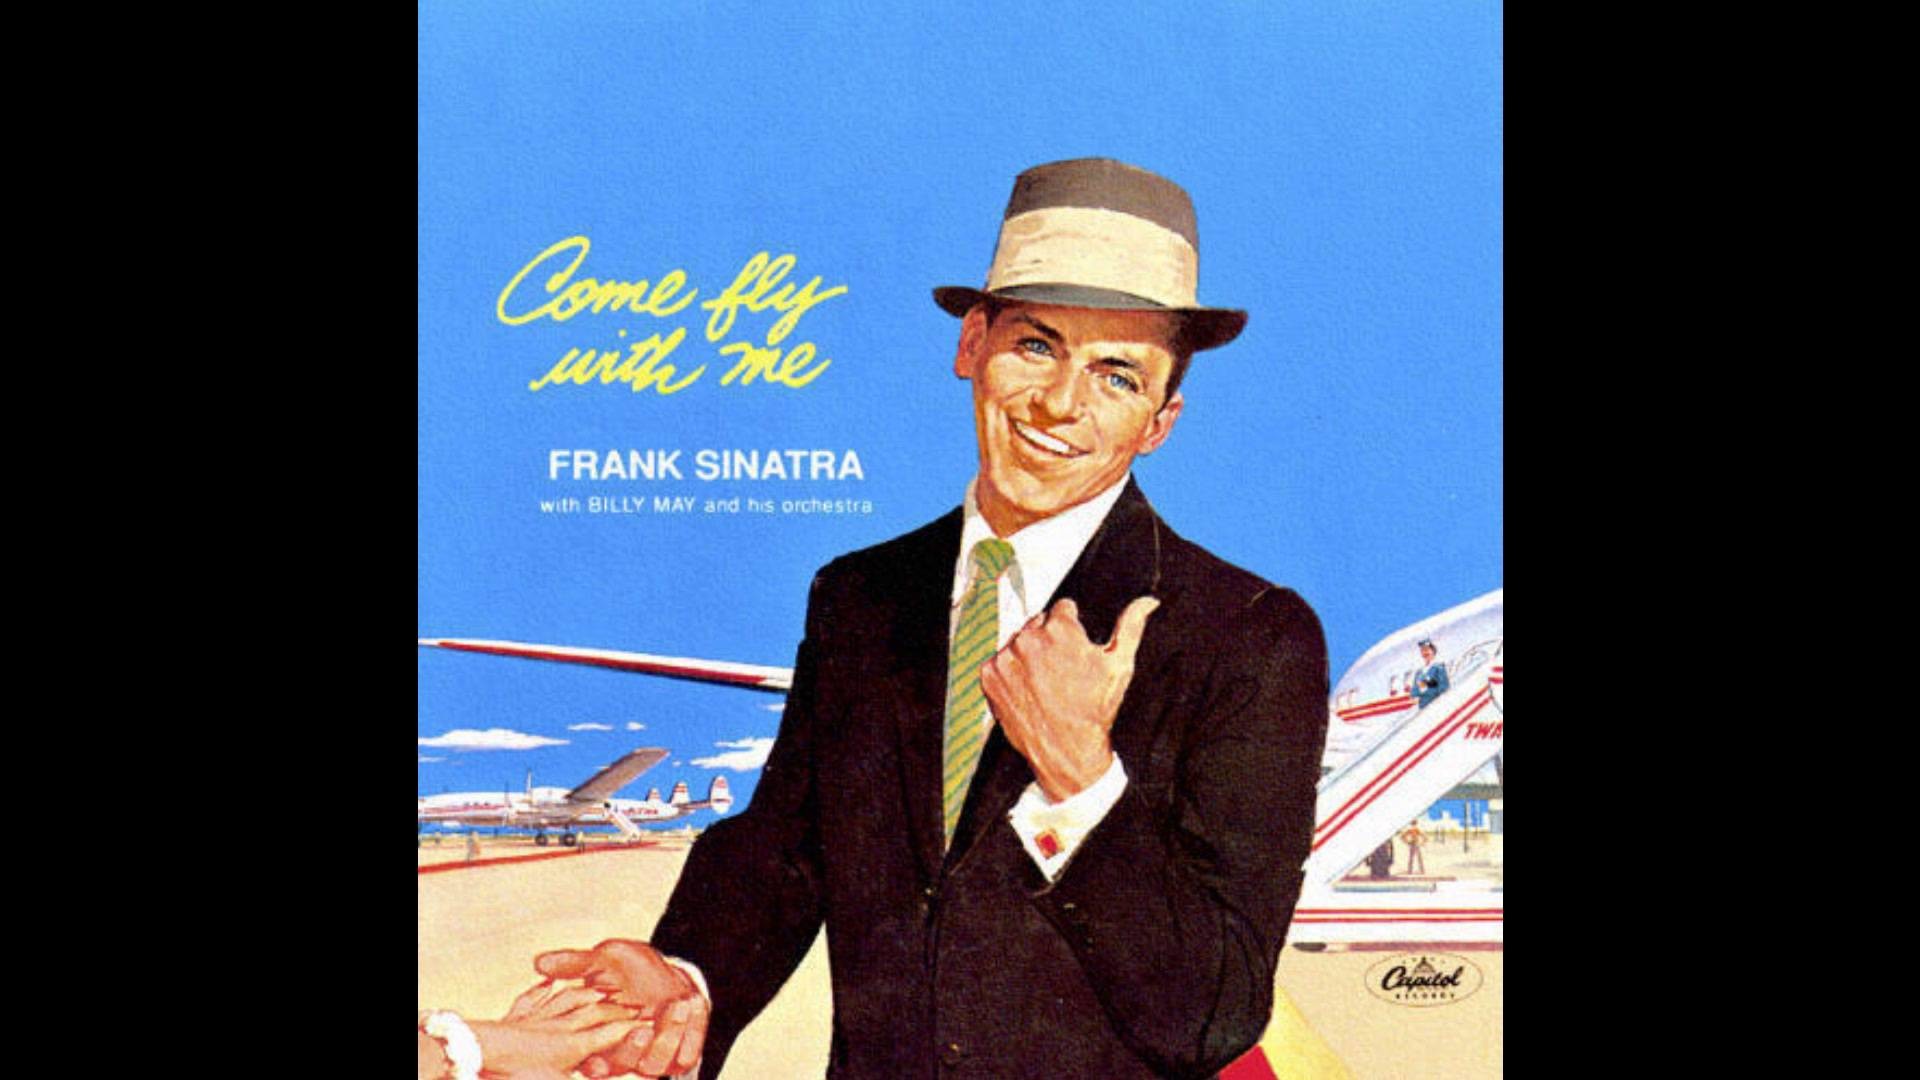 Frank Sinatra - Frank Sinatra Come Fly With Me - HD Wallpaper 